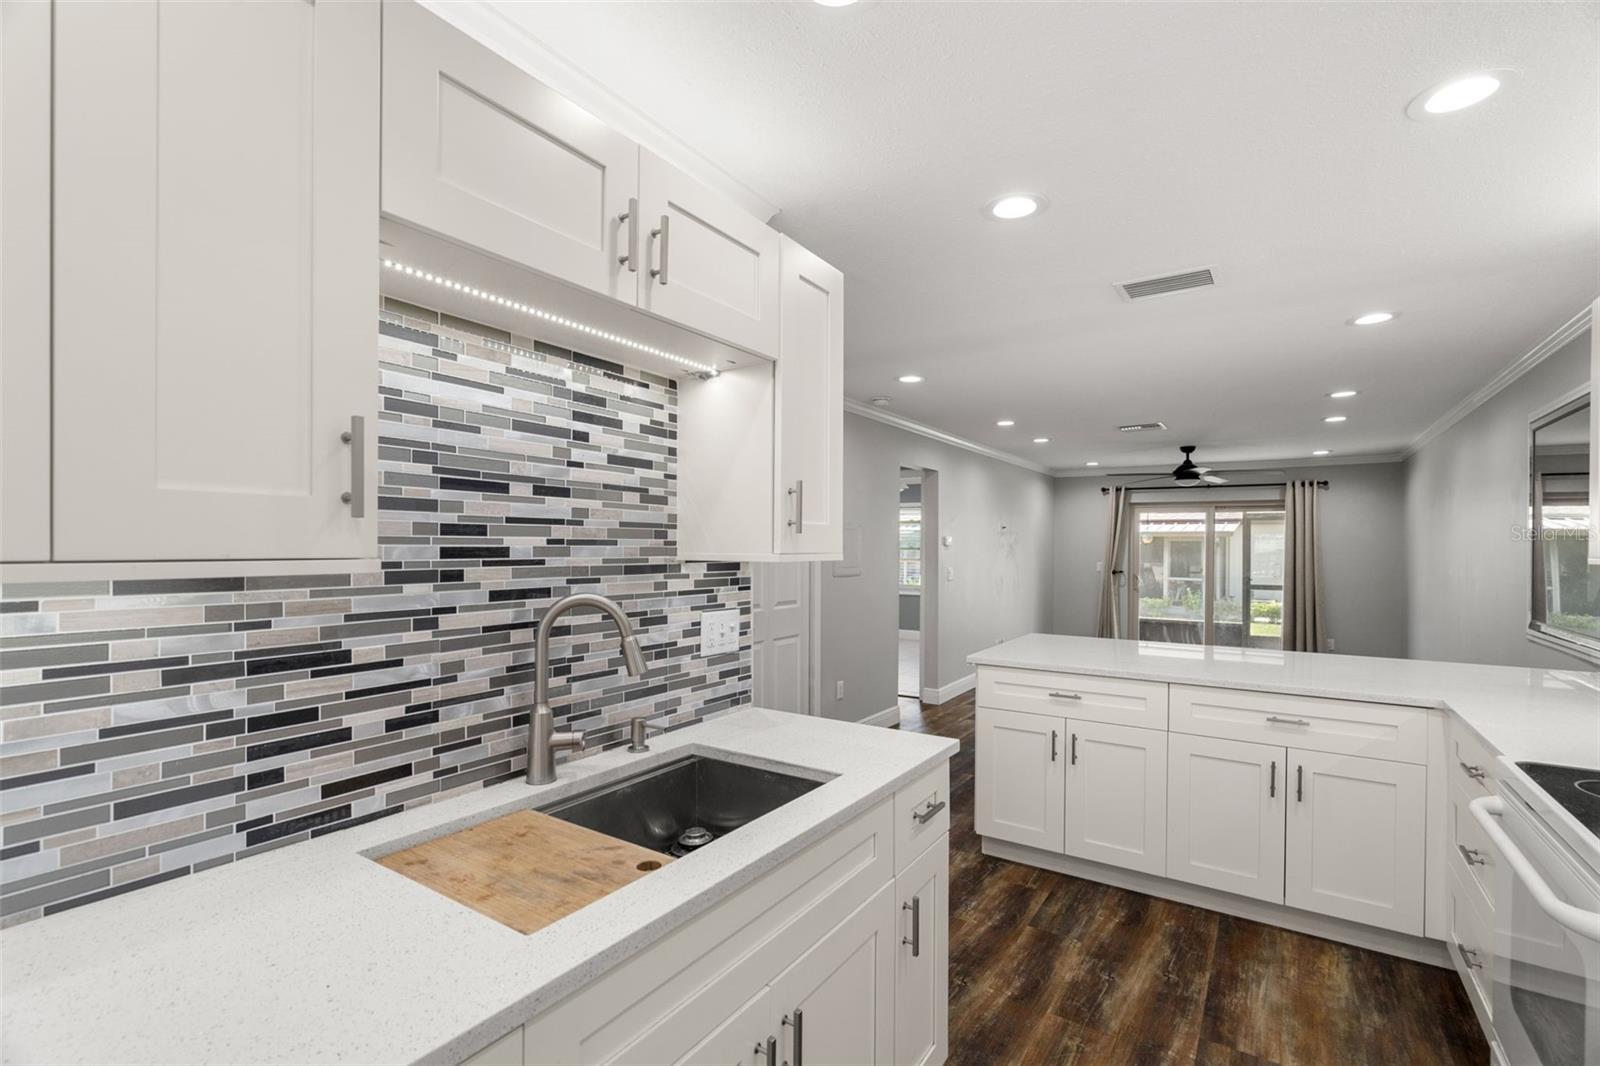 Notice how the under-cabinet lighting beautifully accentuates the backsplash tile. The 2nd bedroom is opposite the living room providing a split floor plan!